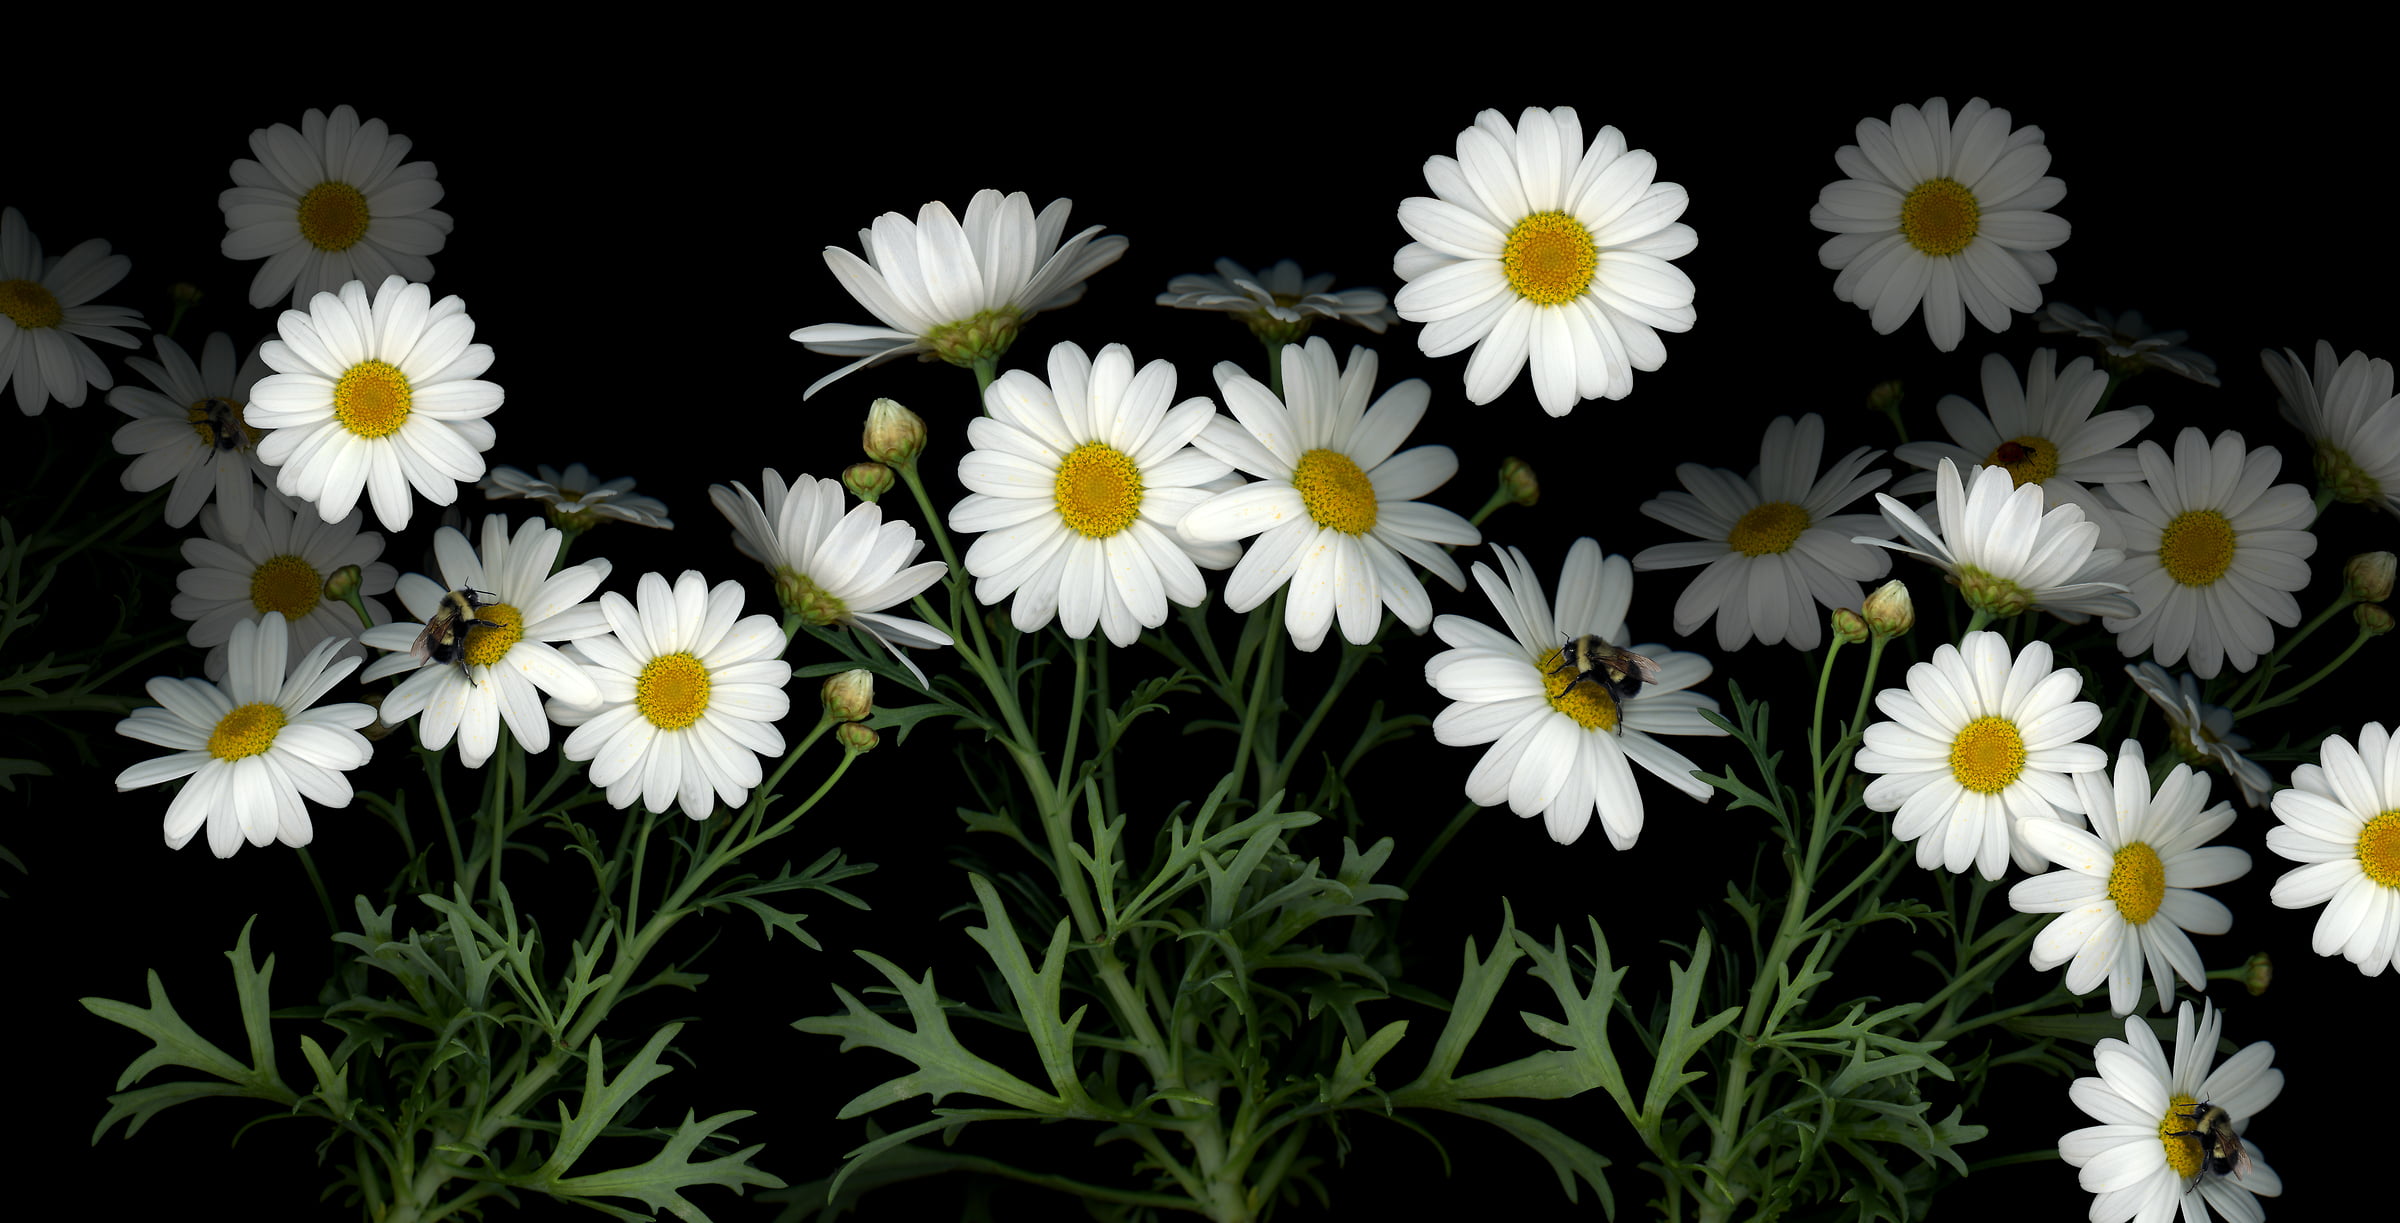 727 megapixels! A very high resolution, large-format VAST photo print of daisy flowers with bumble bees; photograph created by Anja Axelsson